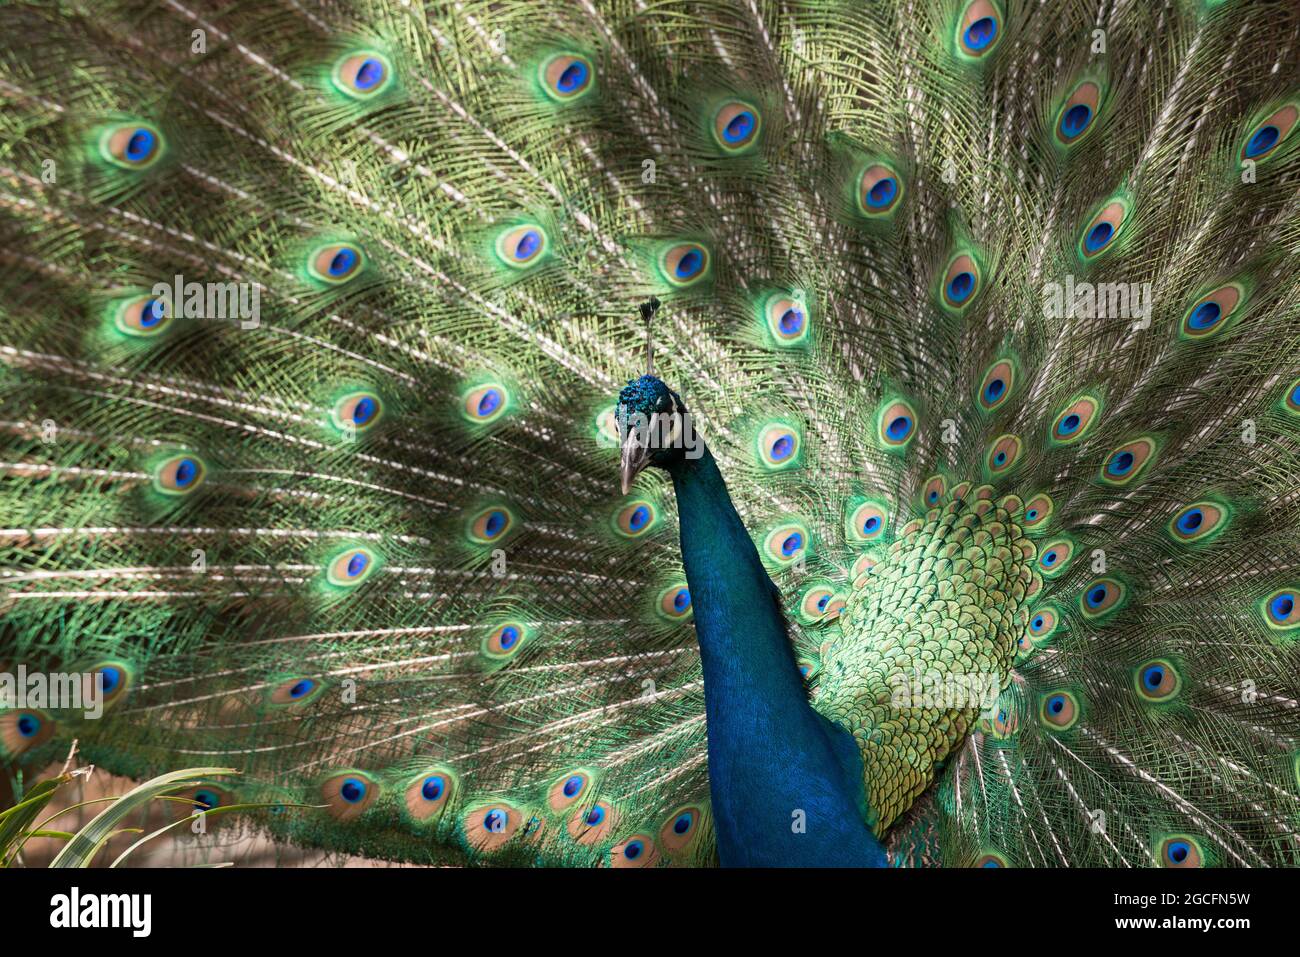 Closeup of a male peacock or Indian peafowl with tail fan open,   Smithsonian National Zoological Park, Washington, DC, USA Stock Photo